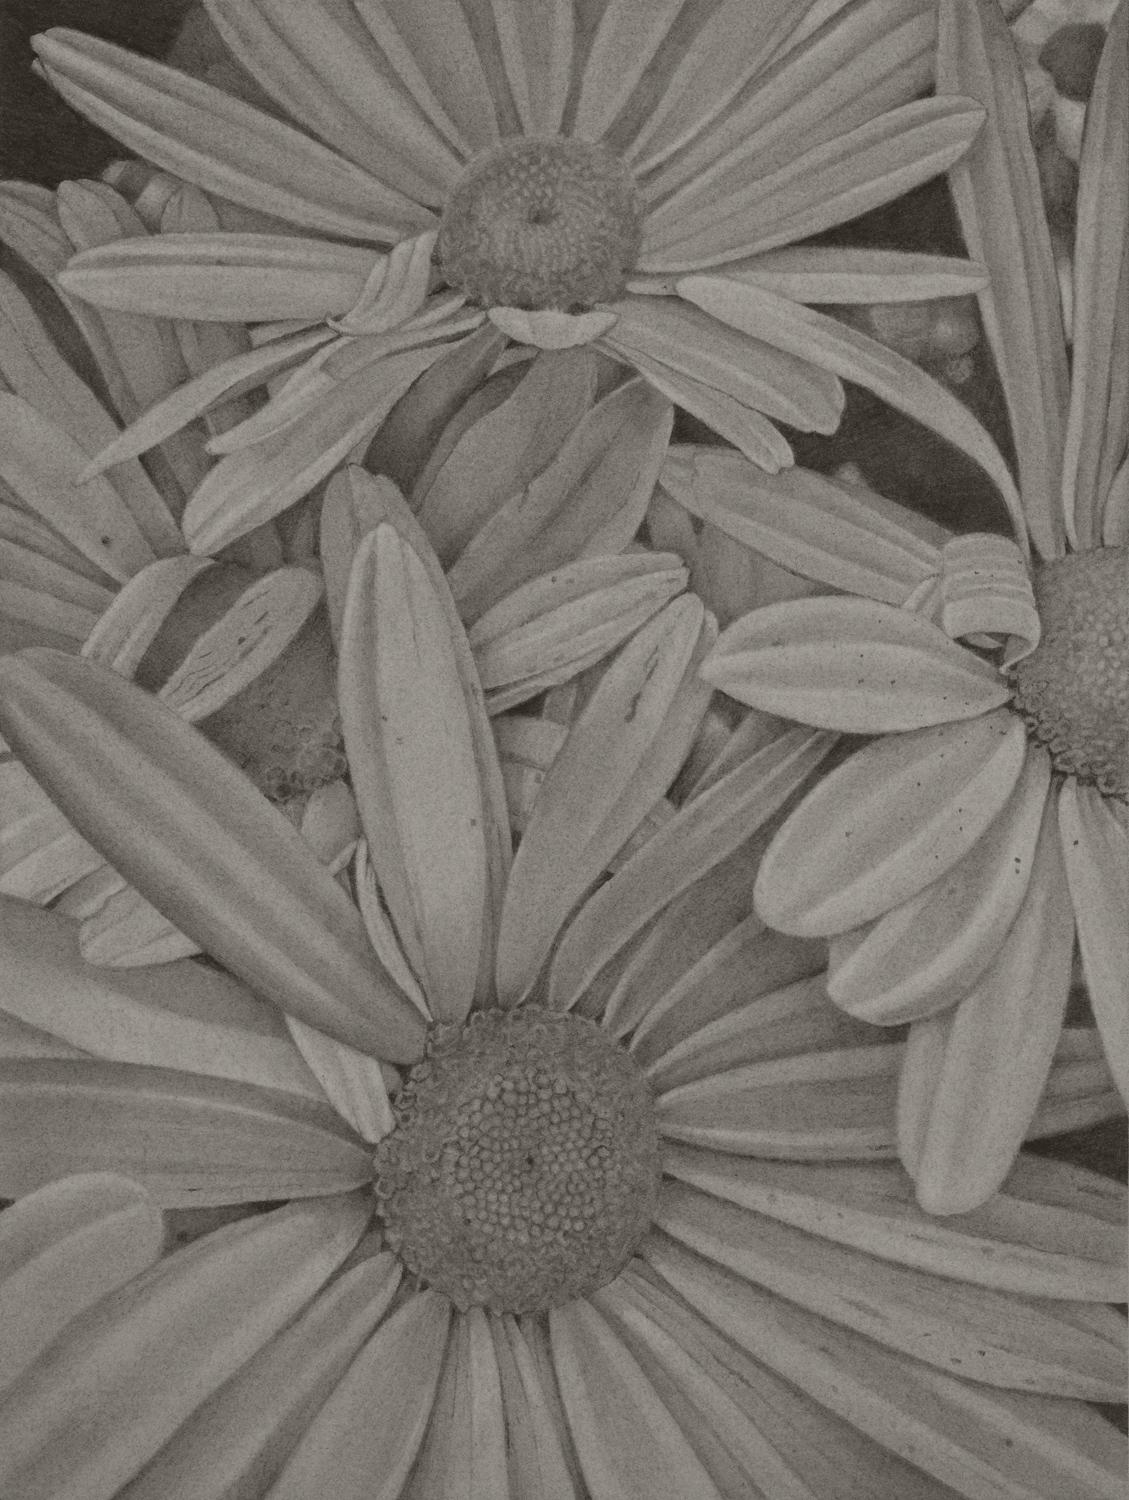 Mary Reilly Landscape Art - Daisies, grey realist graphite on paper floral drawing, 2020